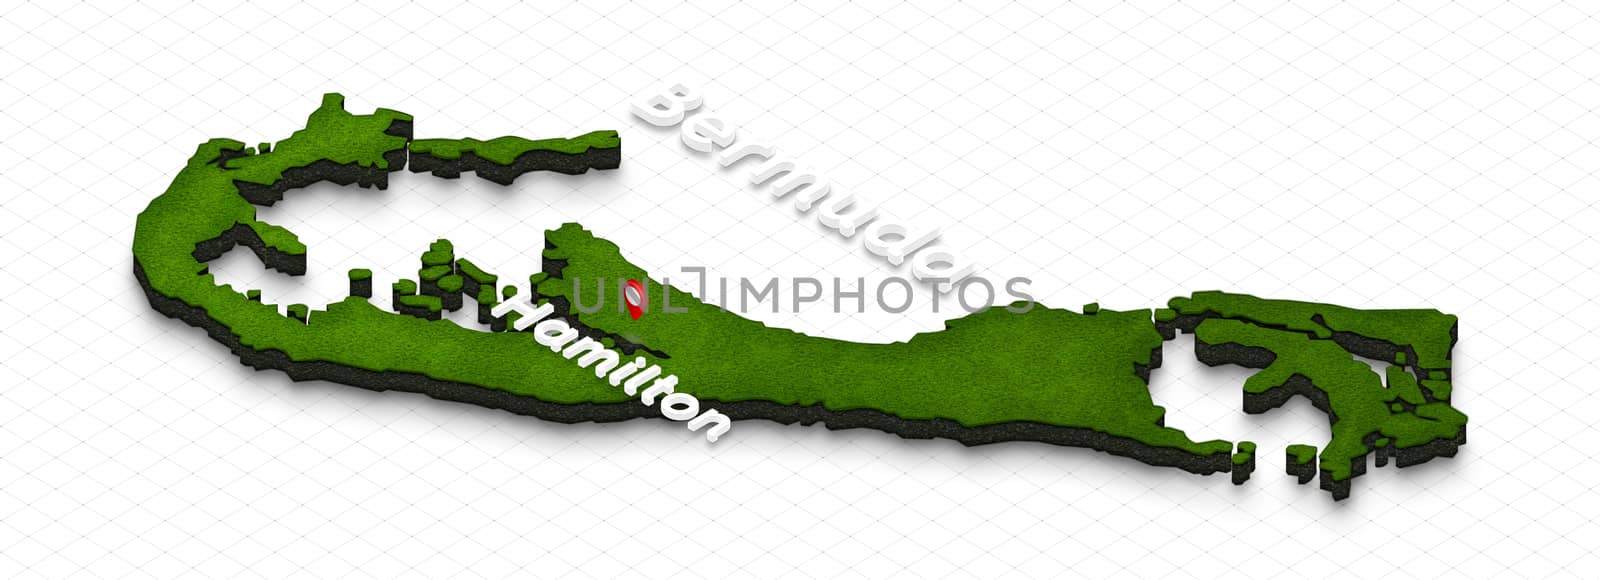 Map of Bermuda. 3D isometric perspective illustration. by sanches812